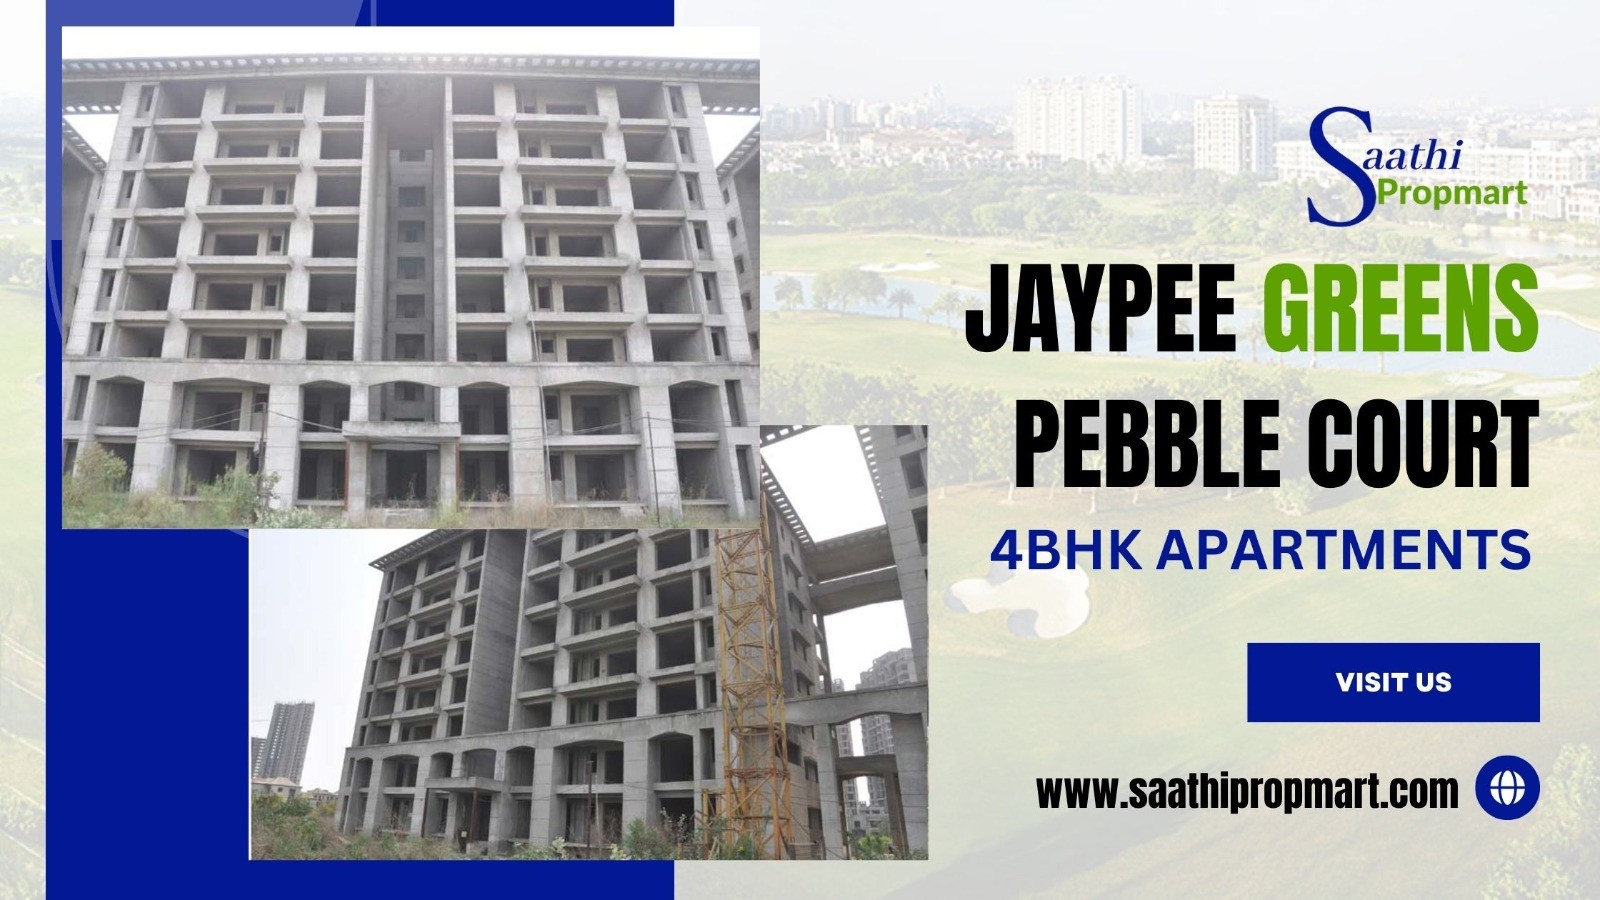 0 Bed/ 0 Bath Sell Apartment/ Flat for sale